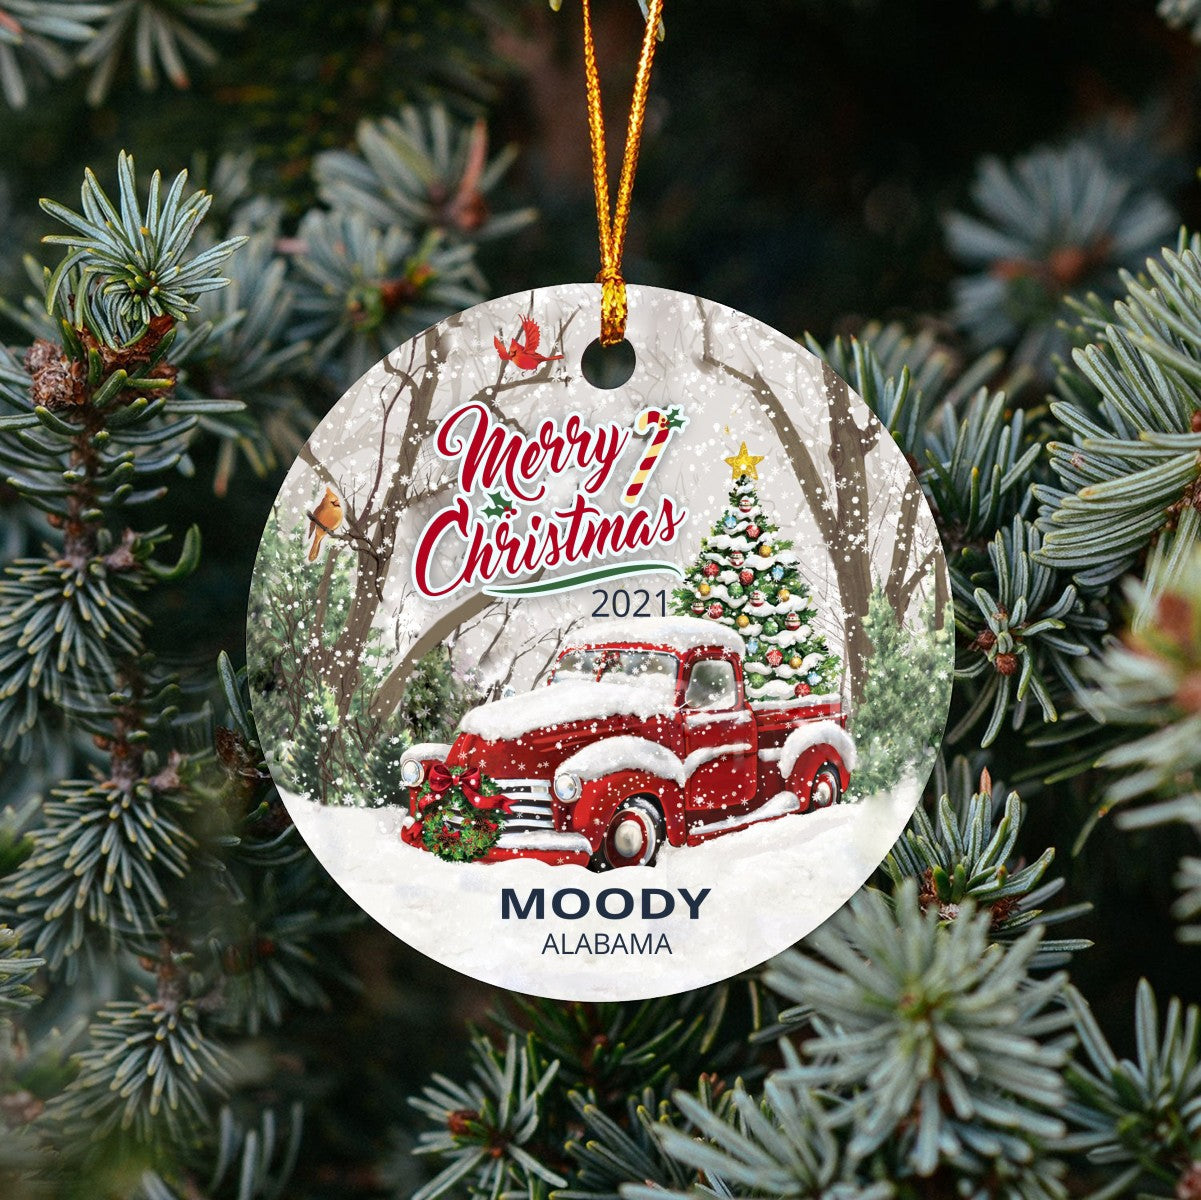 Christmas Tree Ornaments Moody - Ornament Customize With Name City And State Moody Alabama AL - Red Truck Xmas Ornaments 3'' Plastic Gift For Family, Friend And Housewarming